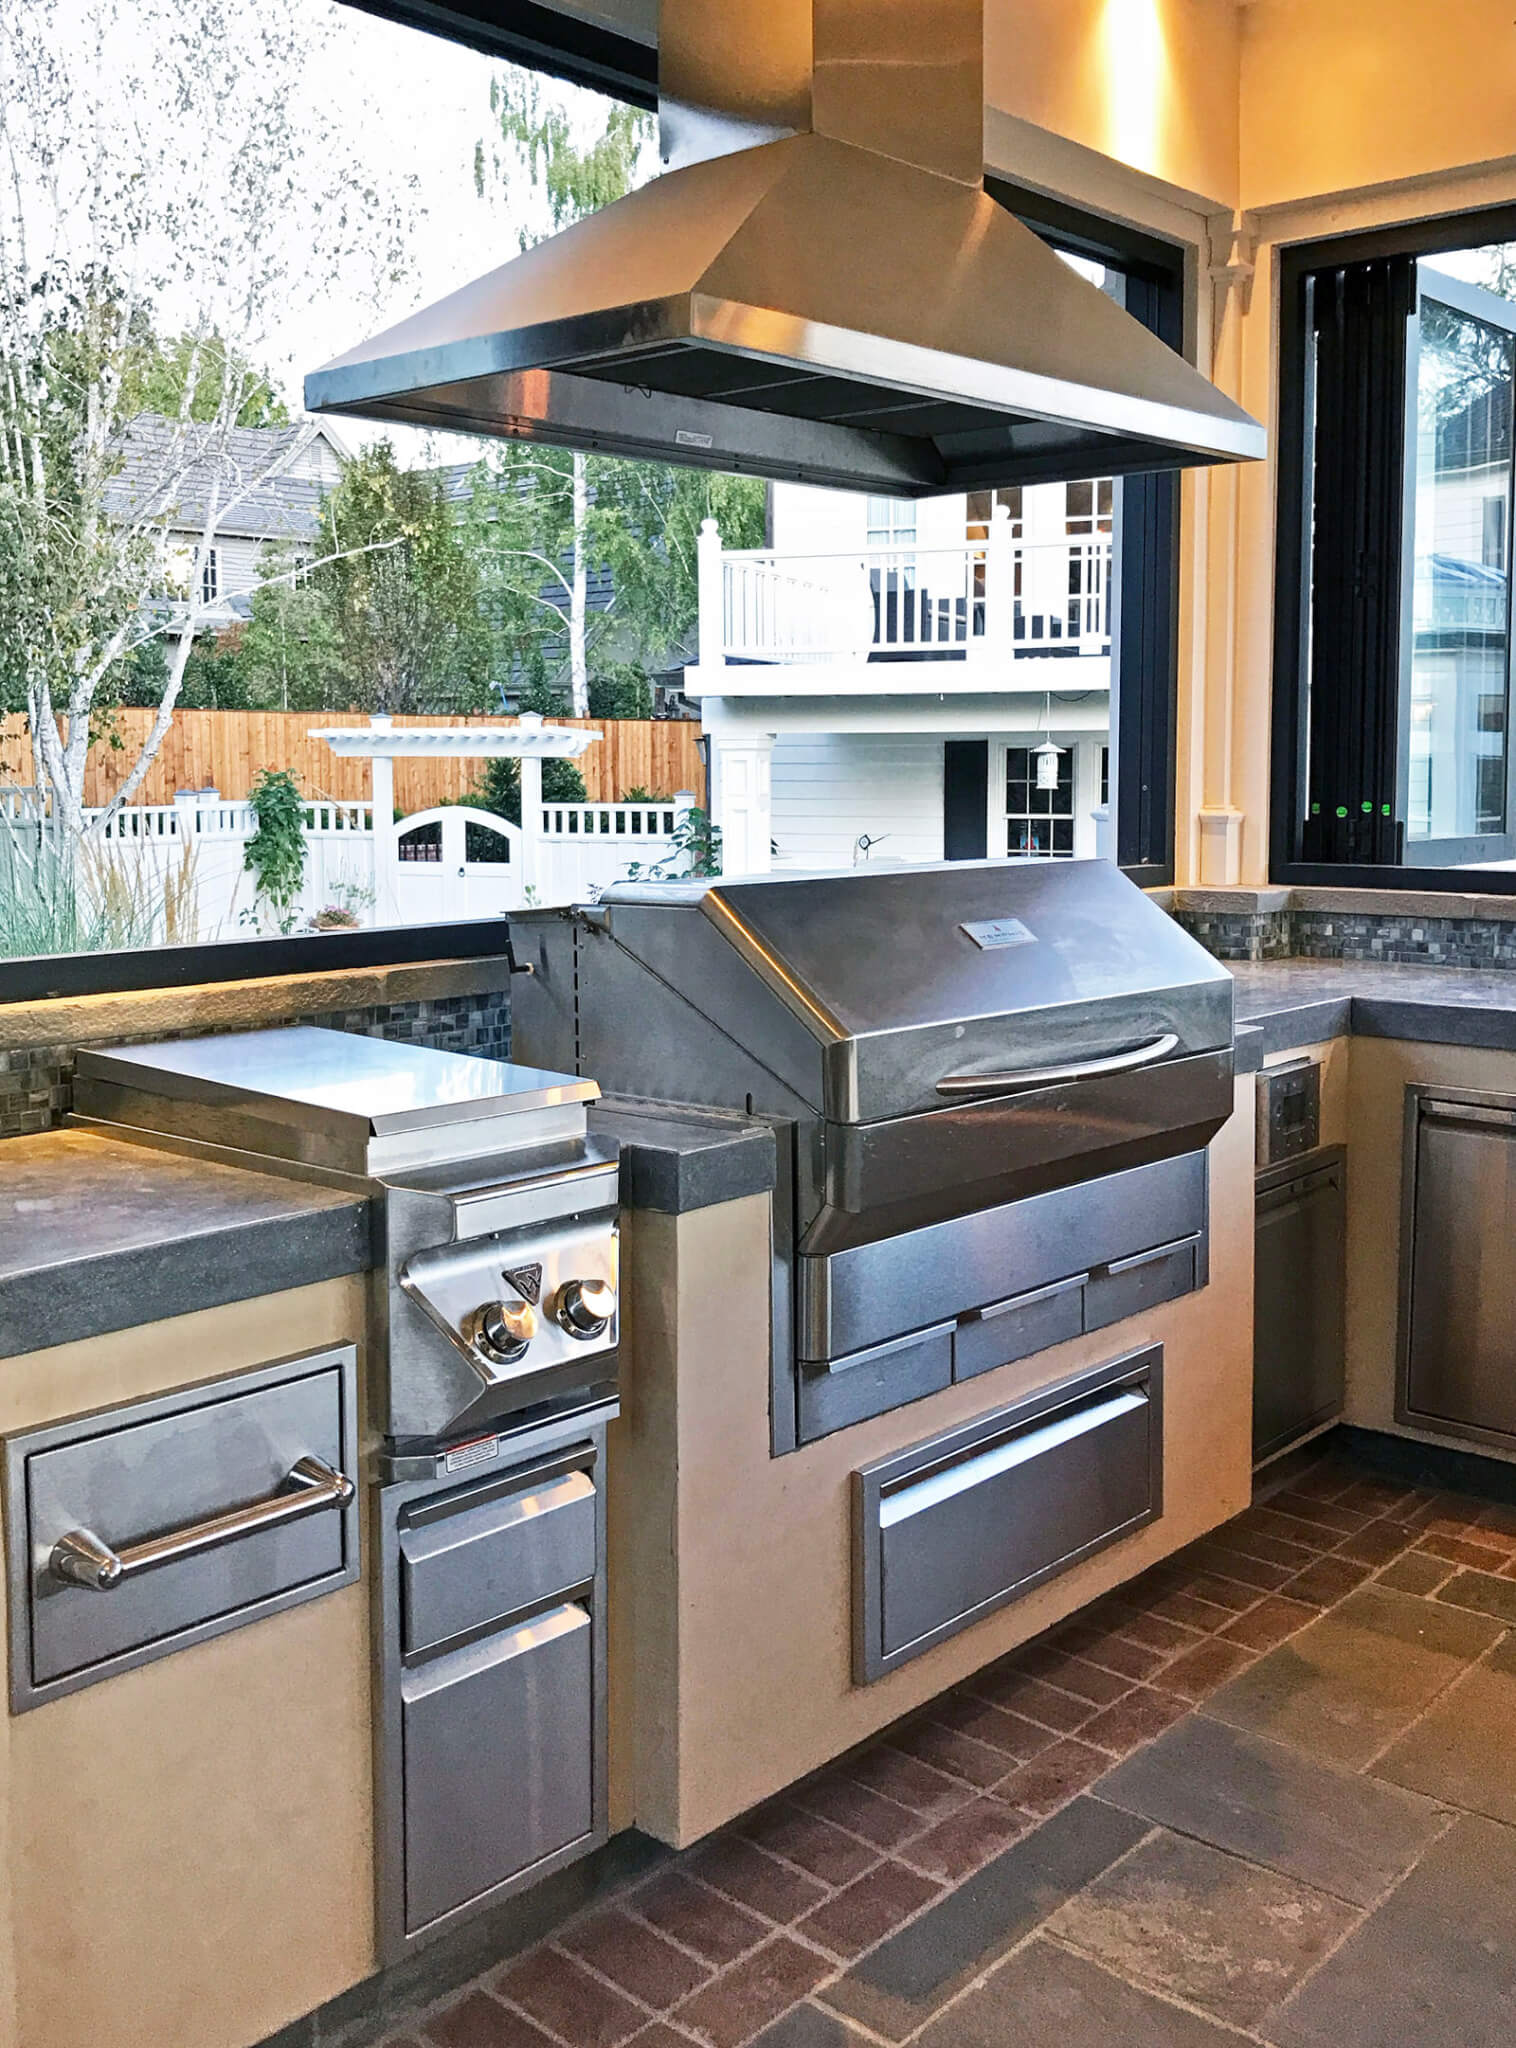 Protected indoor-outdoor kitchen with concrete countertops, built-in contemporary grill with hood, full kitchen amenities and retracting windows